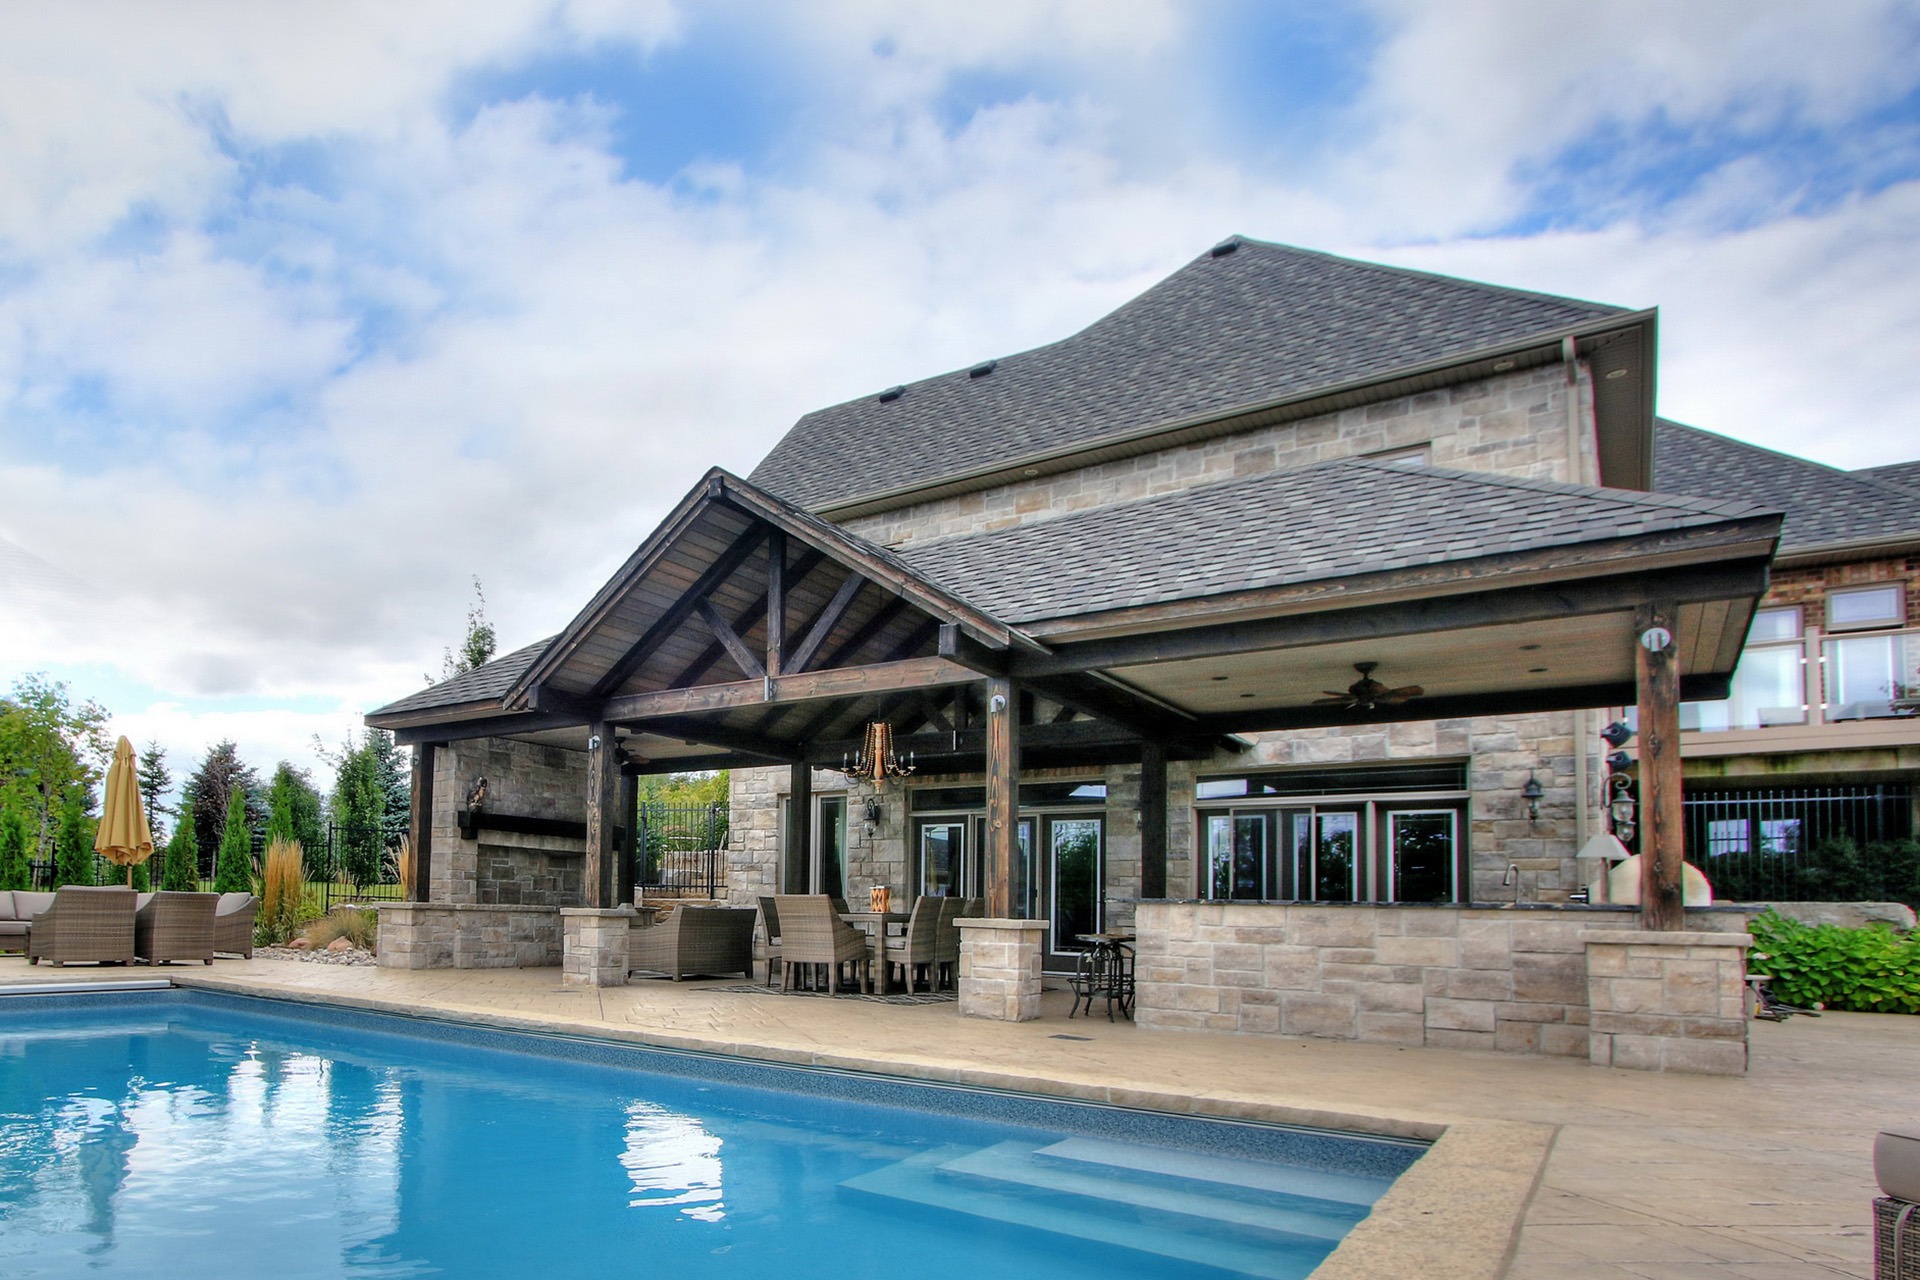 A luxury house with a large pool and outdoor patio featuring a dining area and fireplace. It has stone walls, beautiful landscaping, and a clear sky.